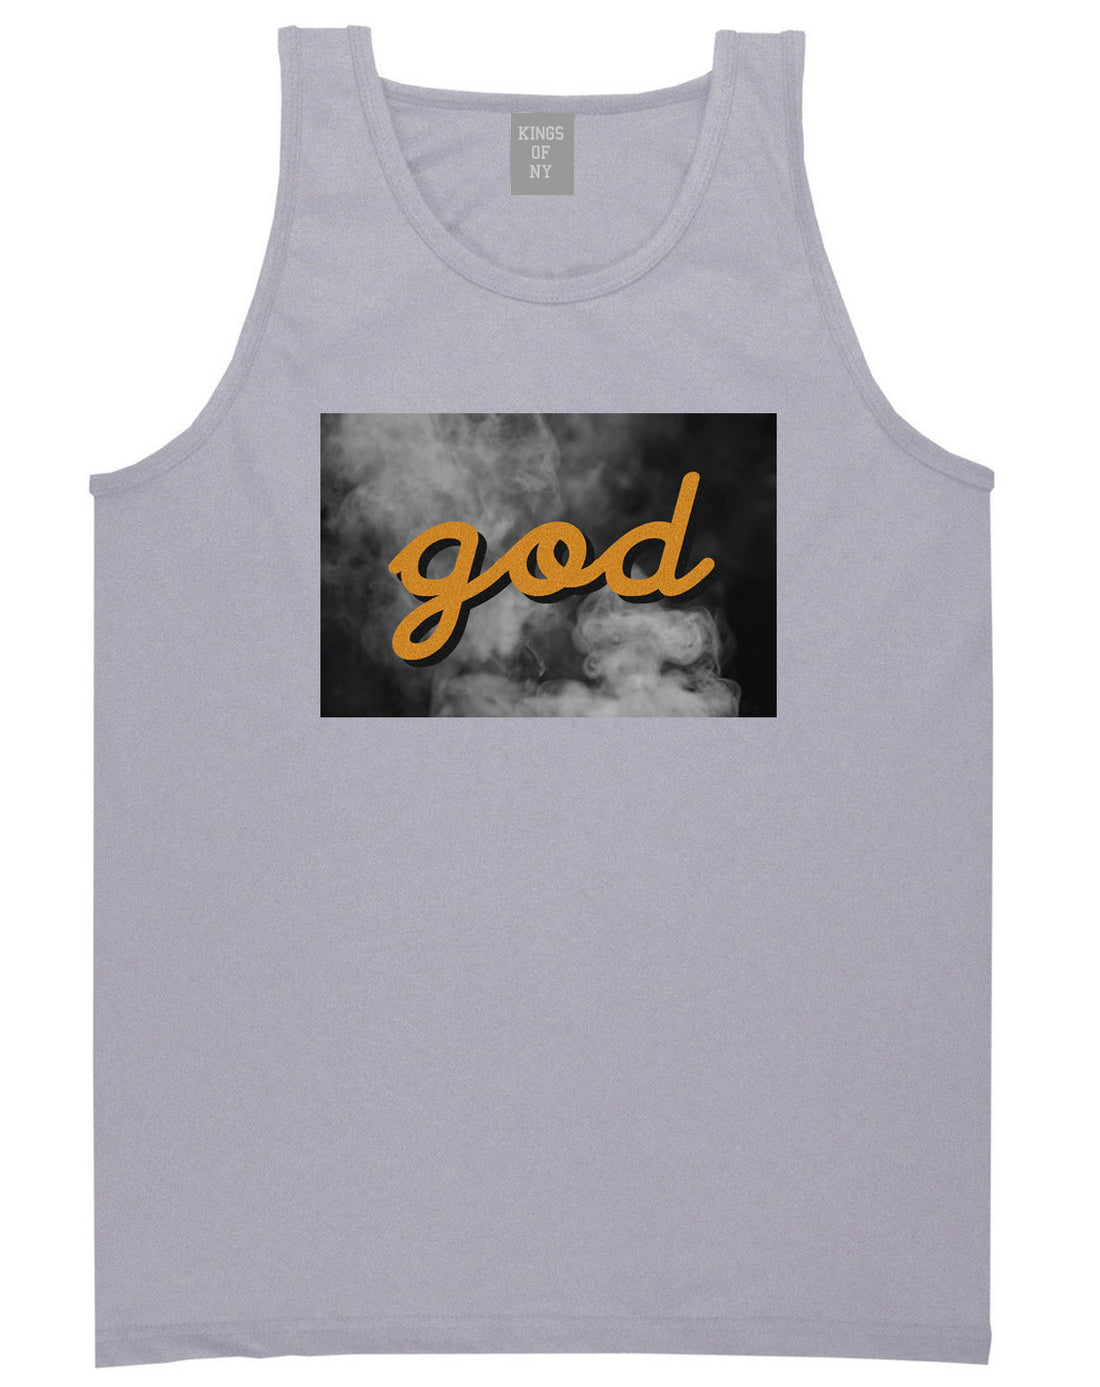 God Up In Smoke Puff Goth Dark Tank Top in Grey By Kings Of NY